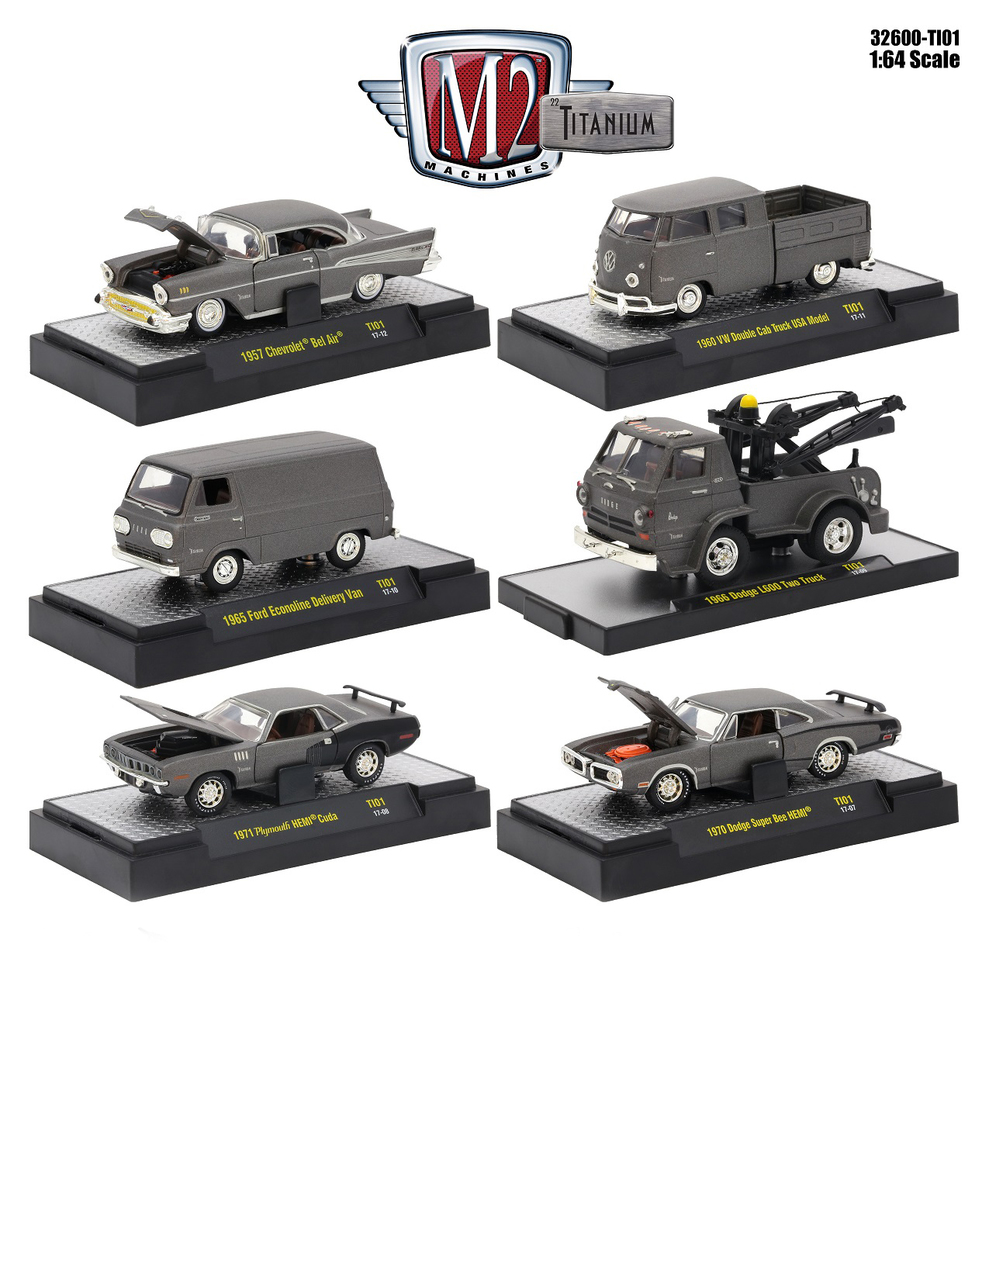 Image of Titanium Release 1 6 Cars Set IN DISPLAY CASES 1/64 Diecast Model Cars by M2 Machines